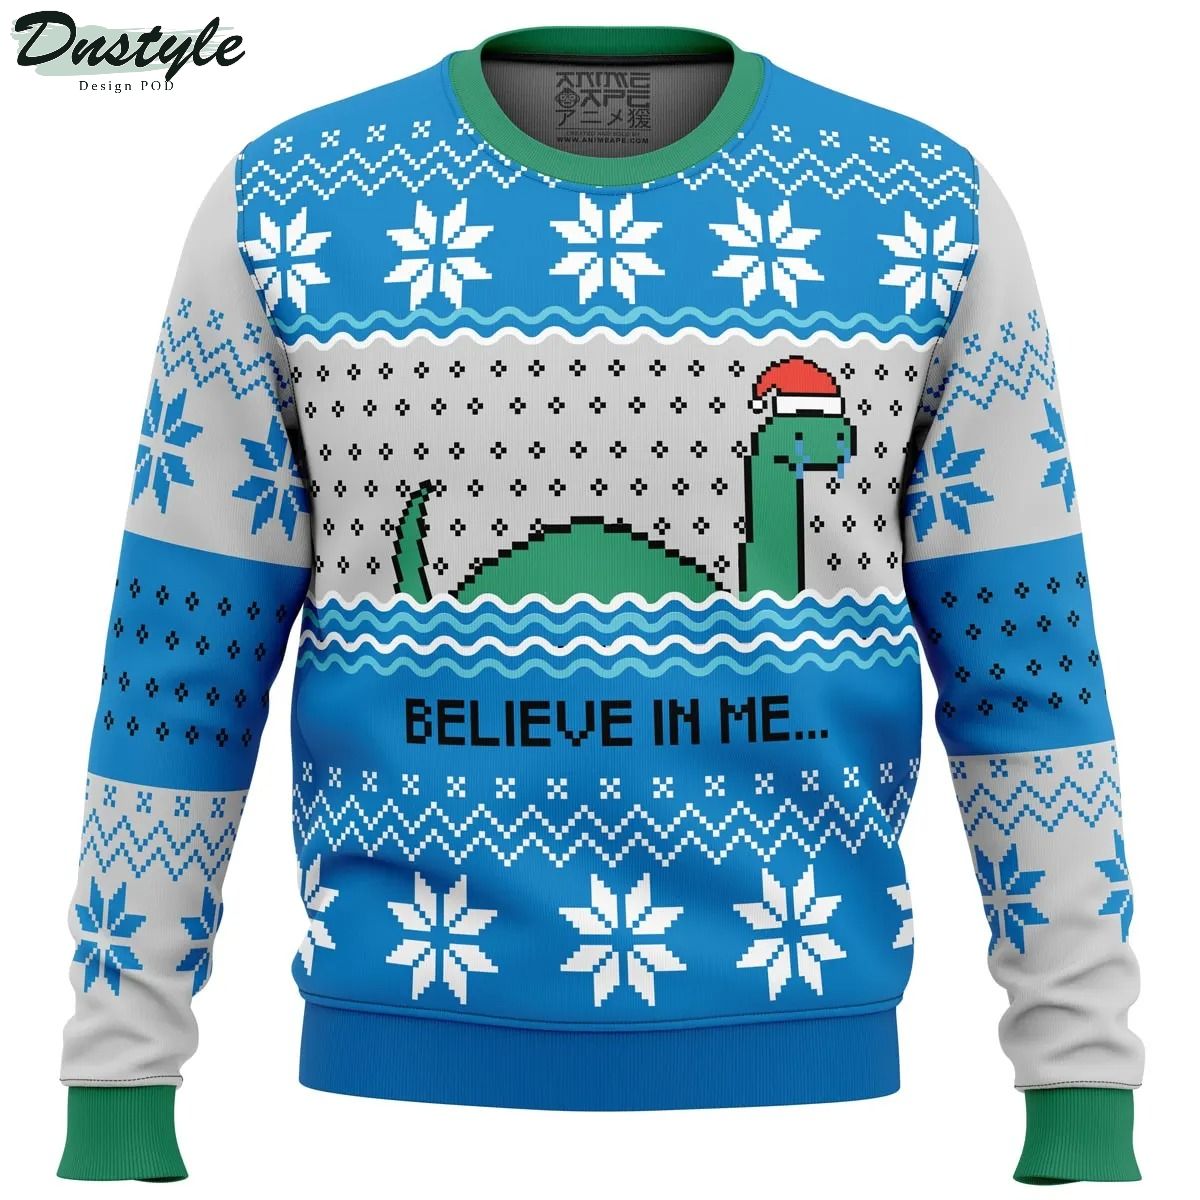 Believe in me…Nessie Ugly Christmas Sweater